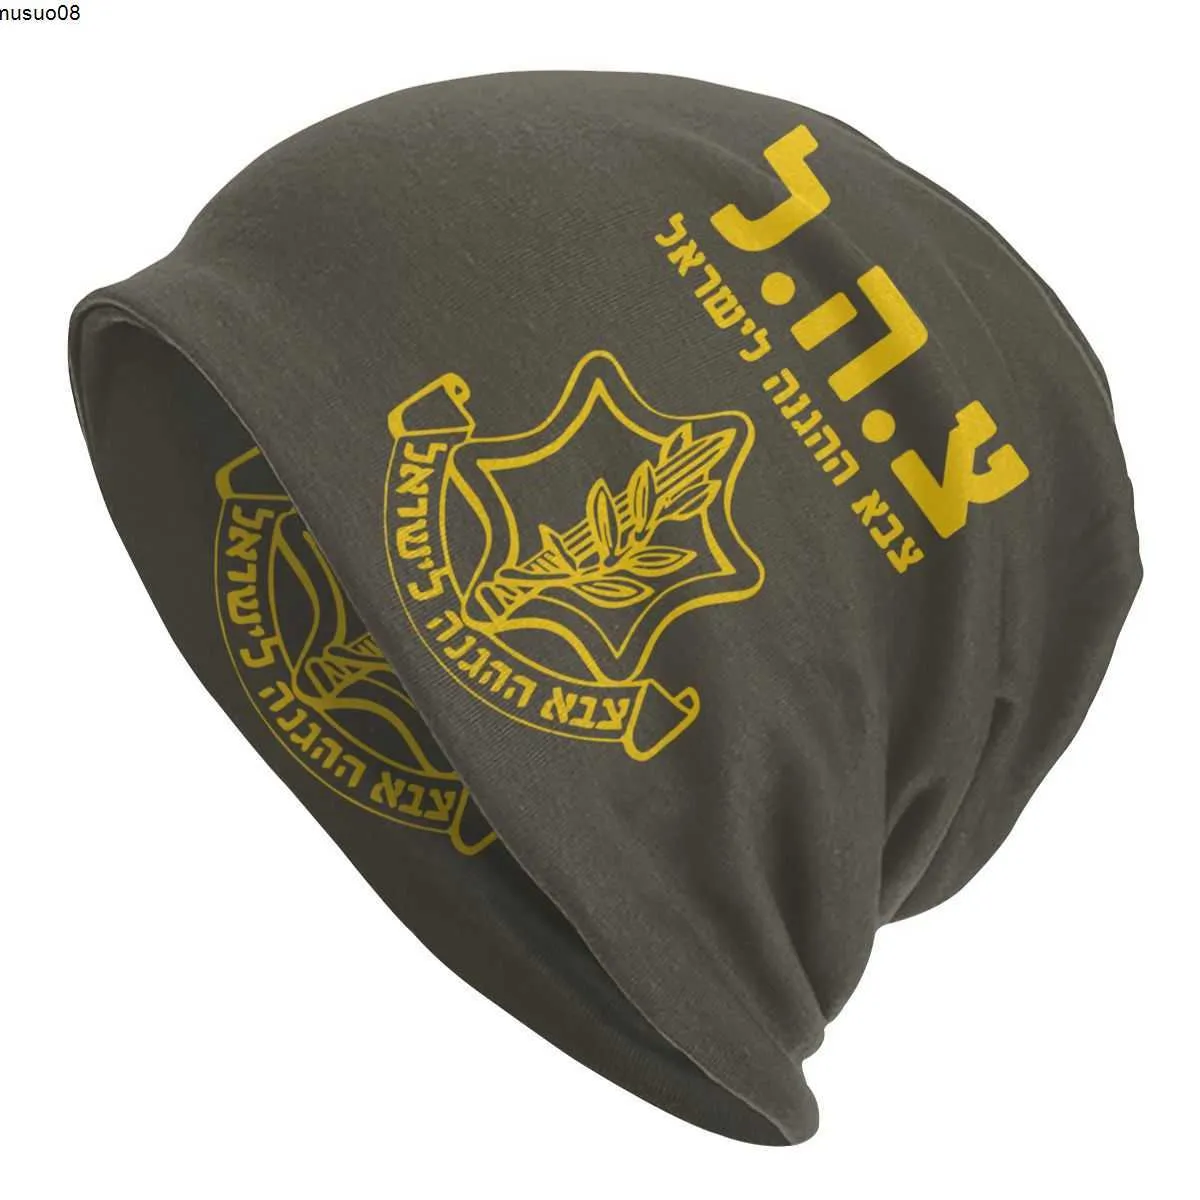 Beanie/Skull Caps IDF Israel Defense Forces Caps Military Army Hip Hop Unisex Outdoor Skullies Beanies Hats Spring Warm Dual-use Bonnet Knit Hat J230518